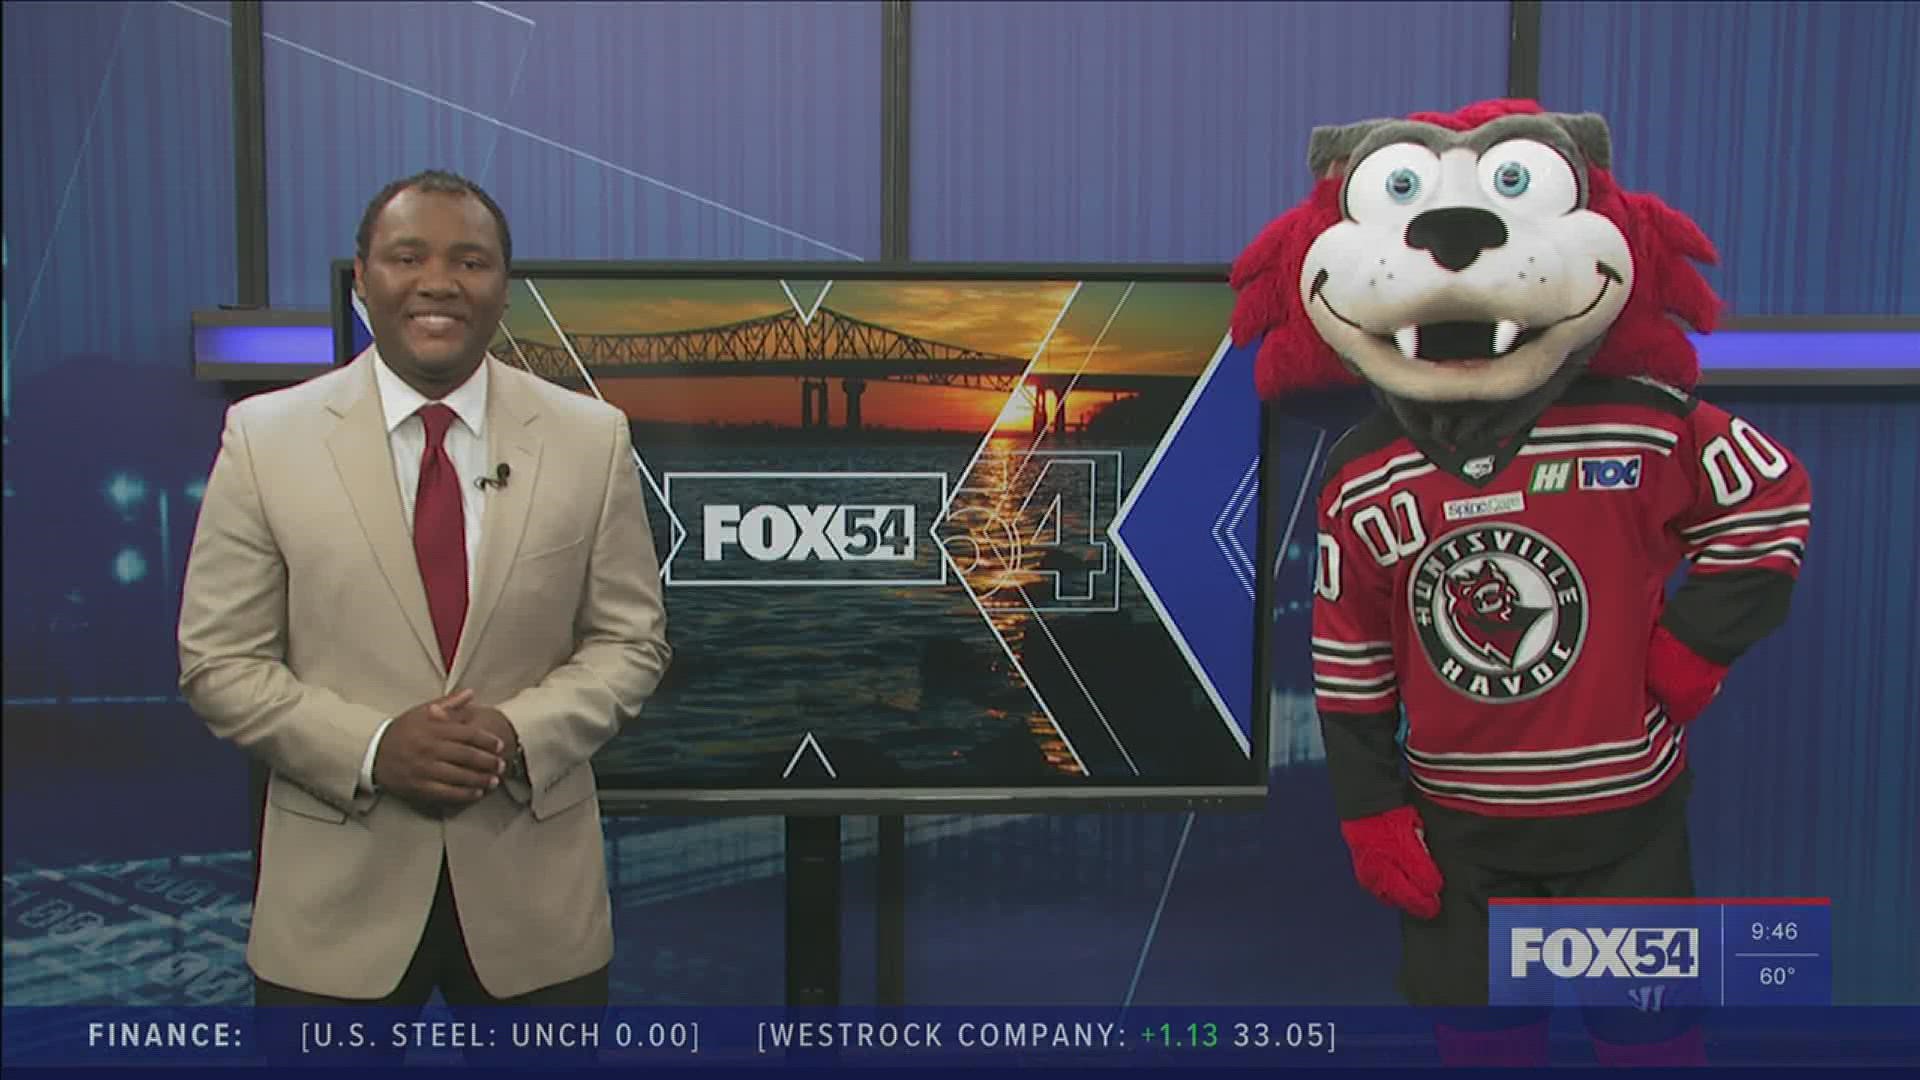 Coach Glenn Detulleo & Chaos stopped by the FOX54 studio to provide a short preview on the Huntsville Havoc's upcoming season